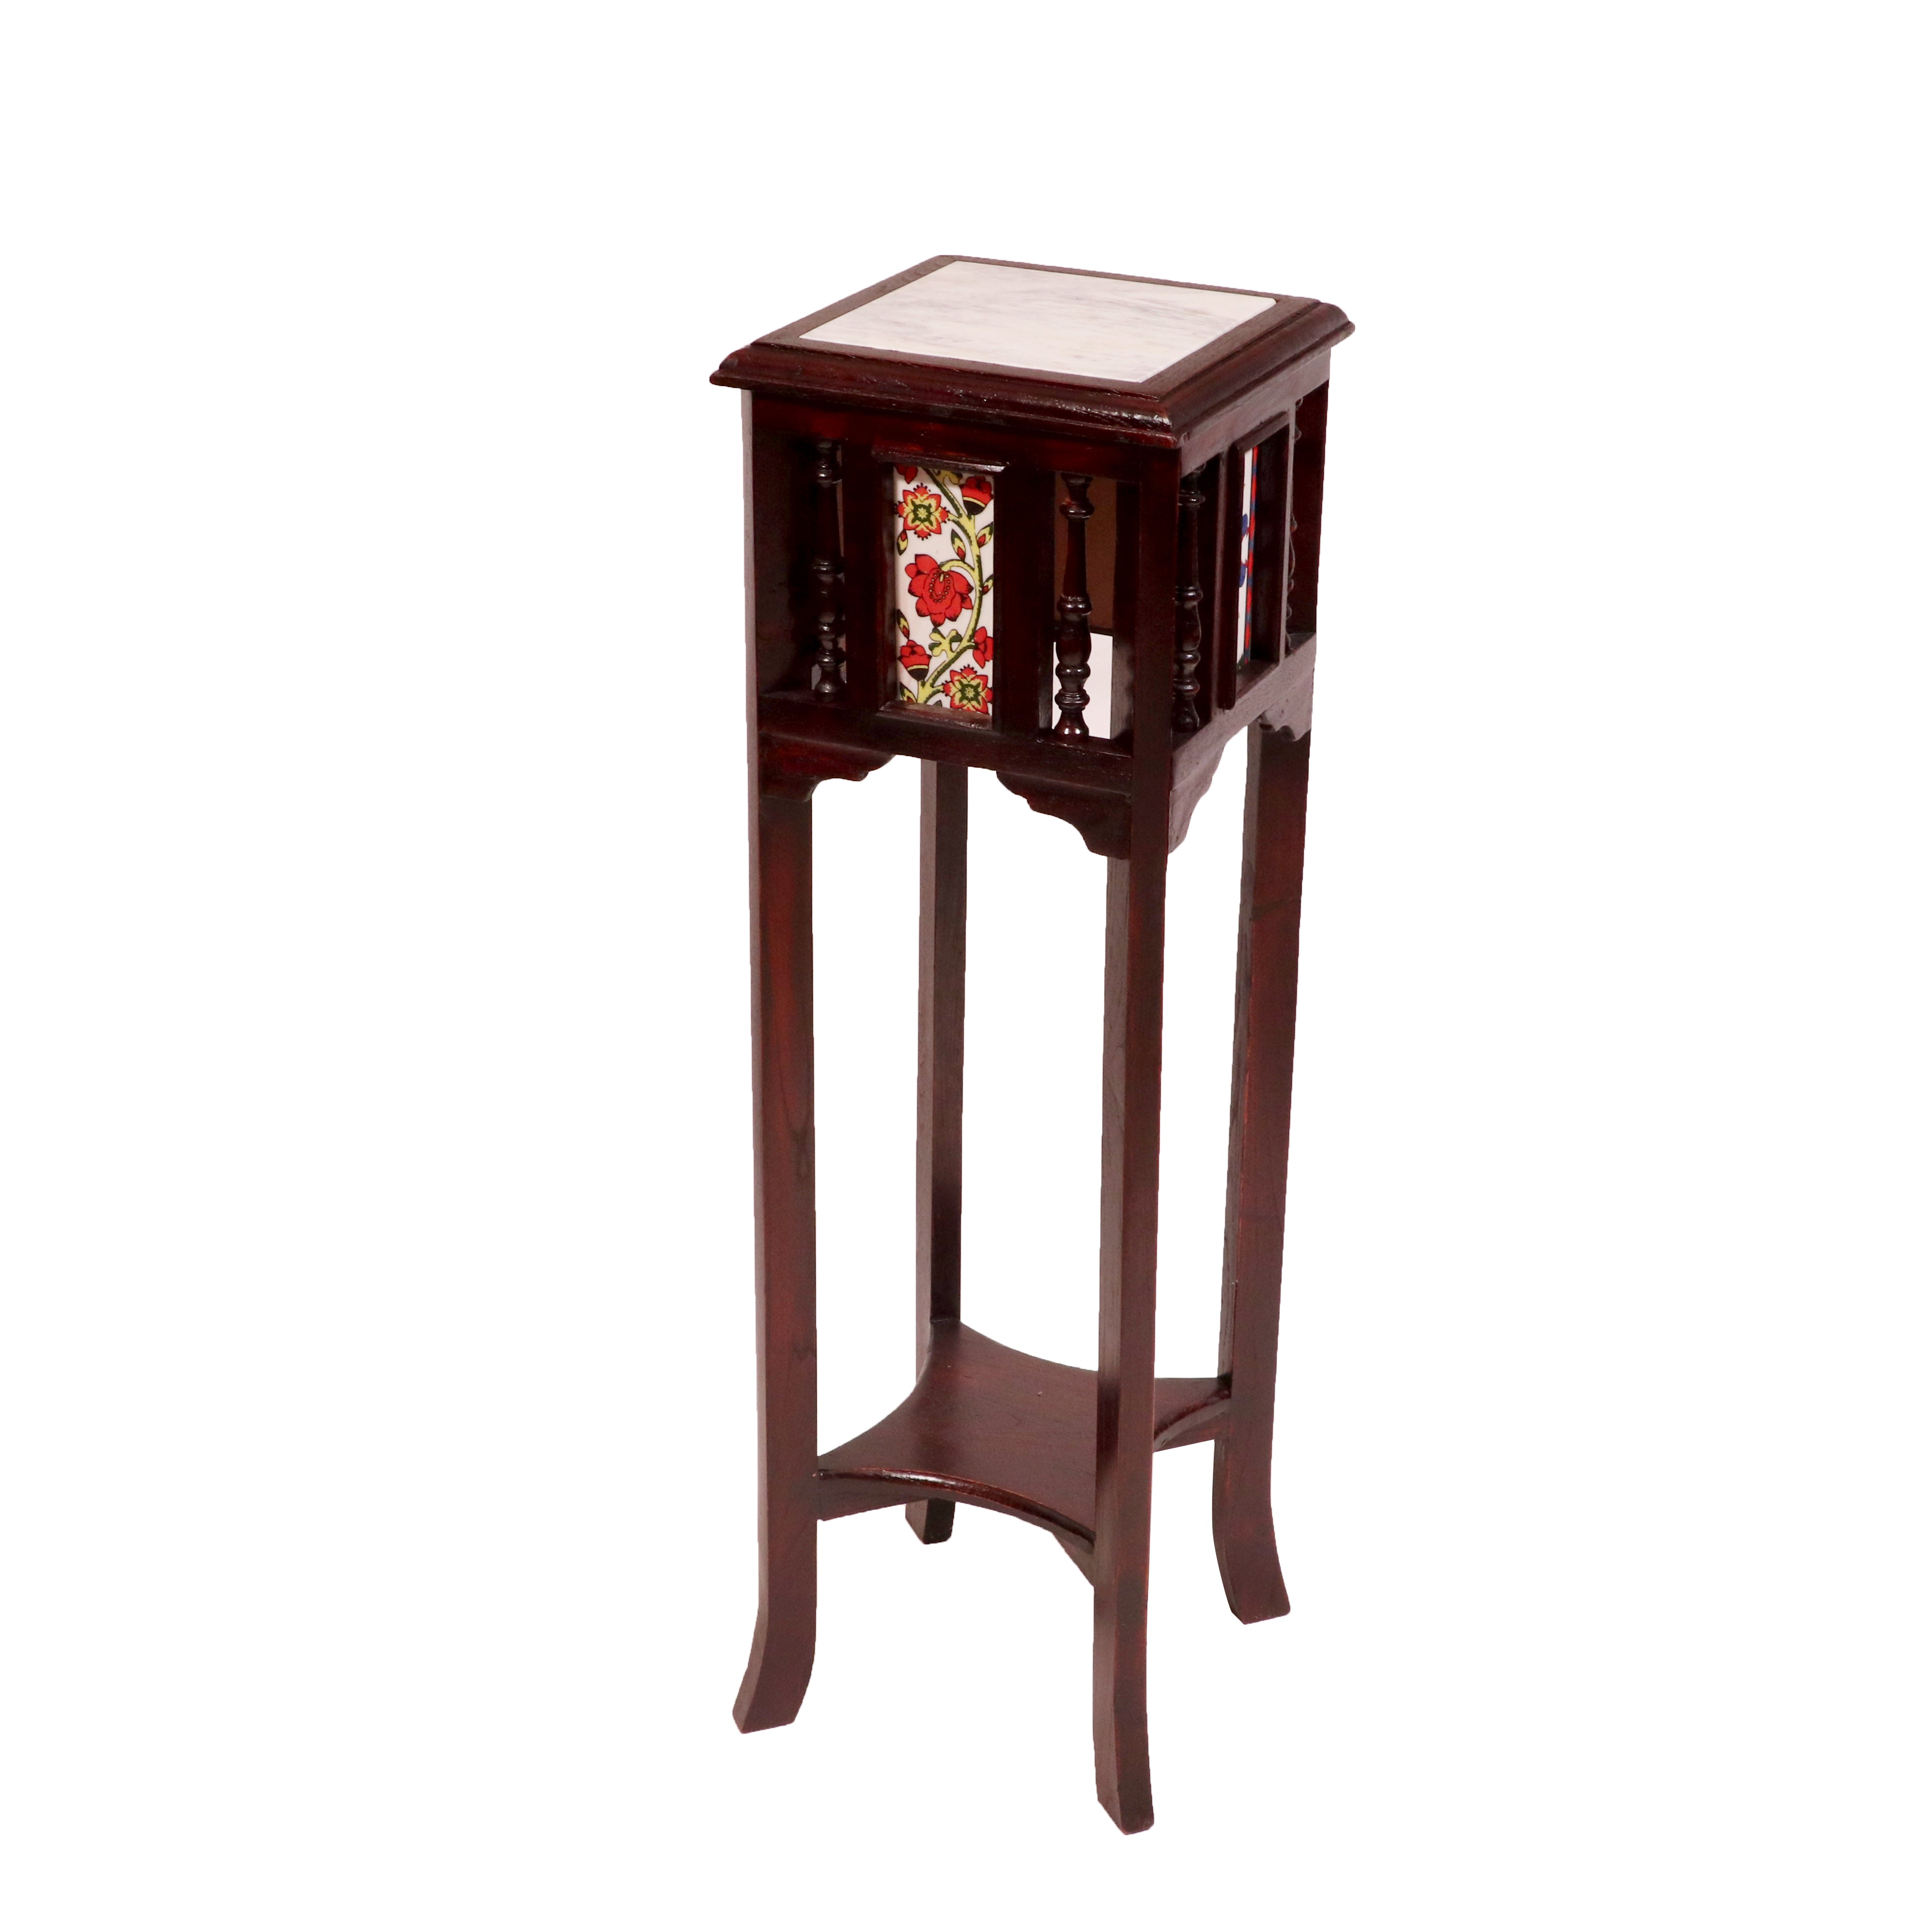 Teak ceramic tile end table with marble top 11 x 11 x 36 Inch End Table